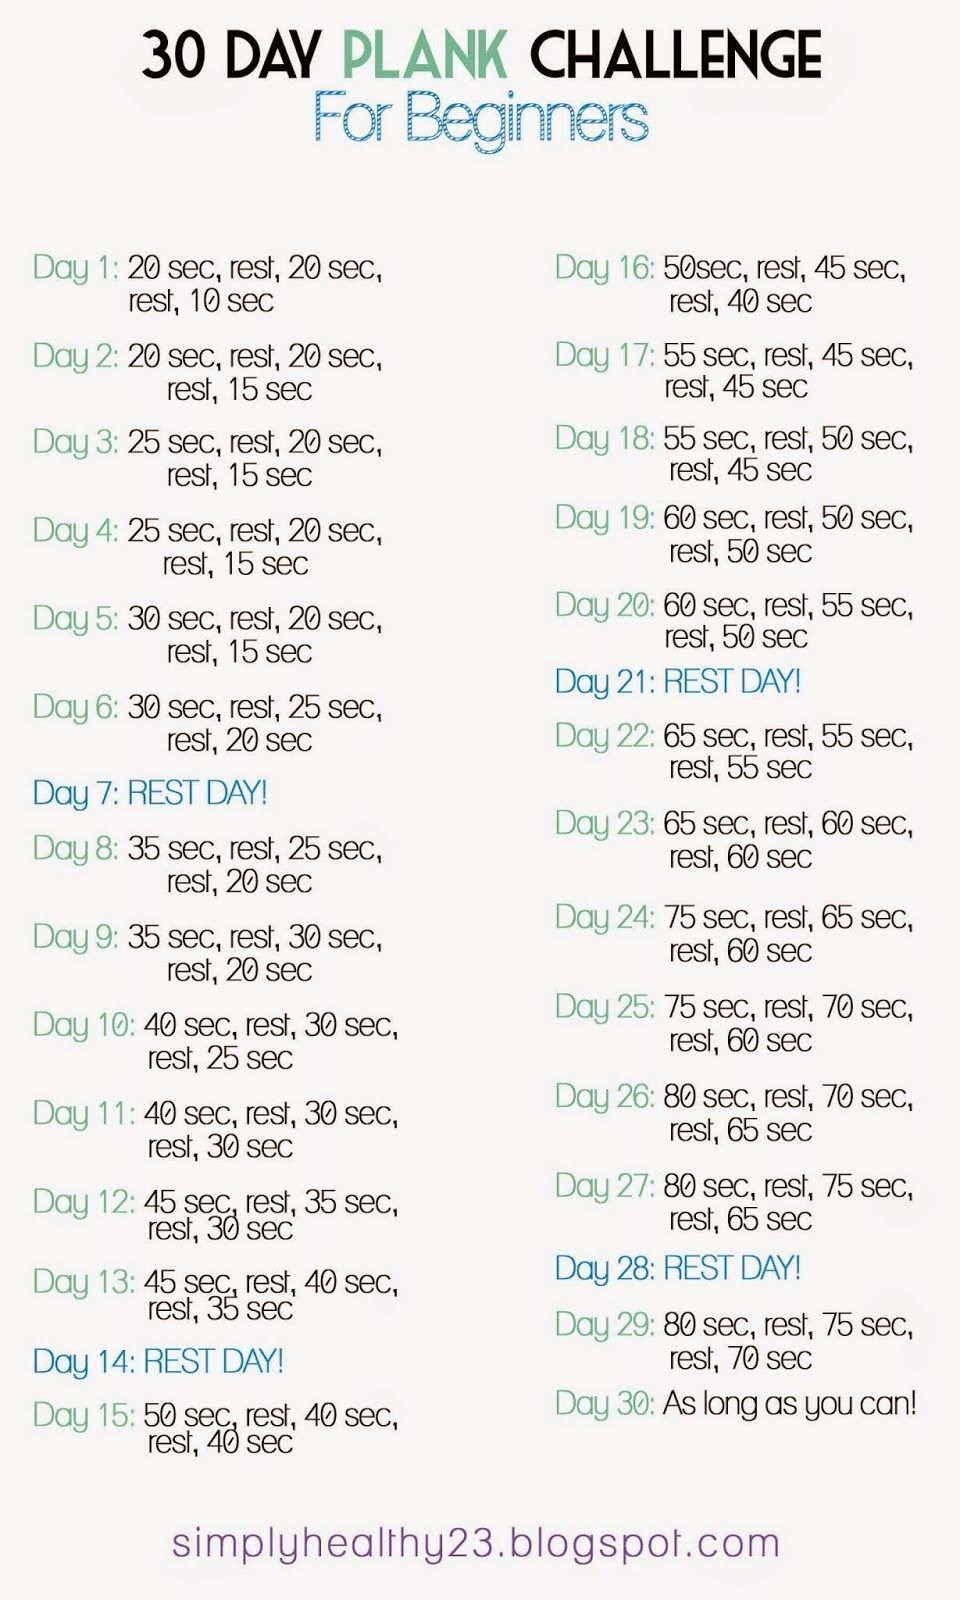 Thoughts On The 30 Day Plank Challenge | 30 Day Plank